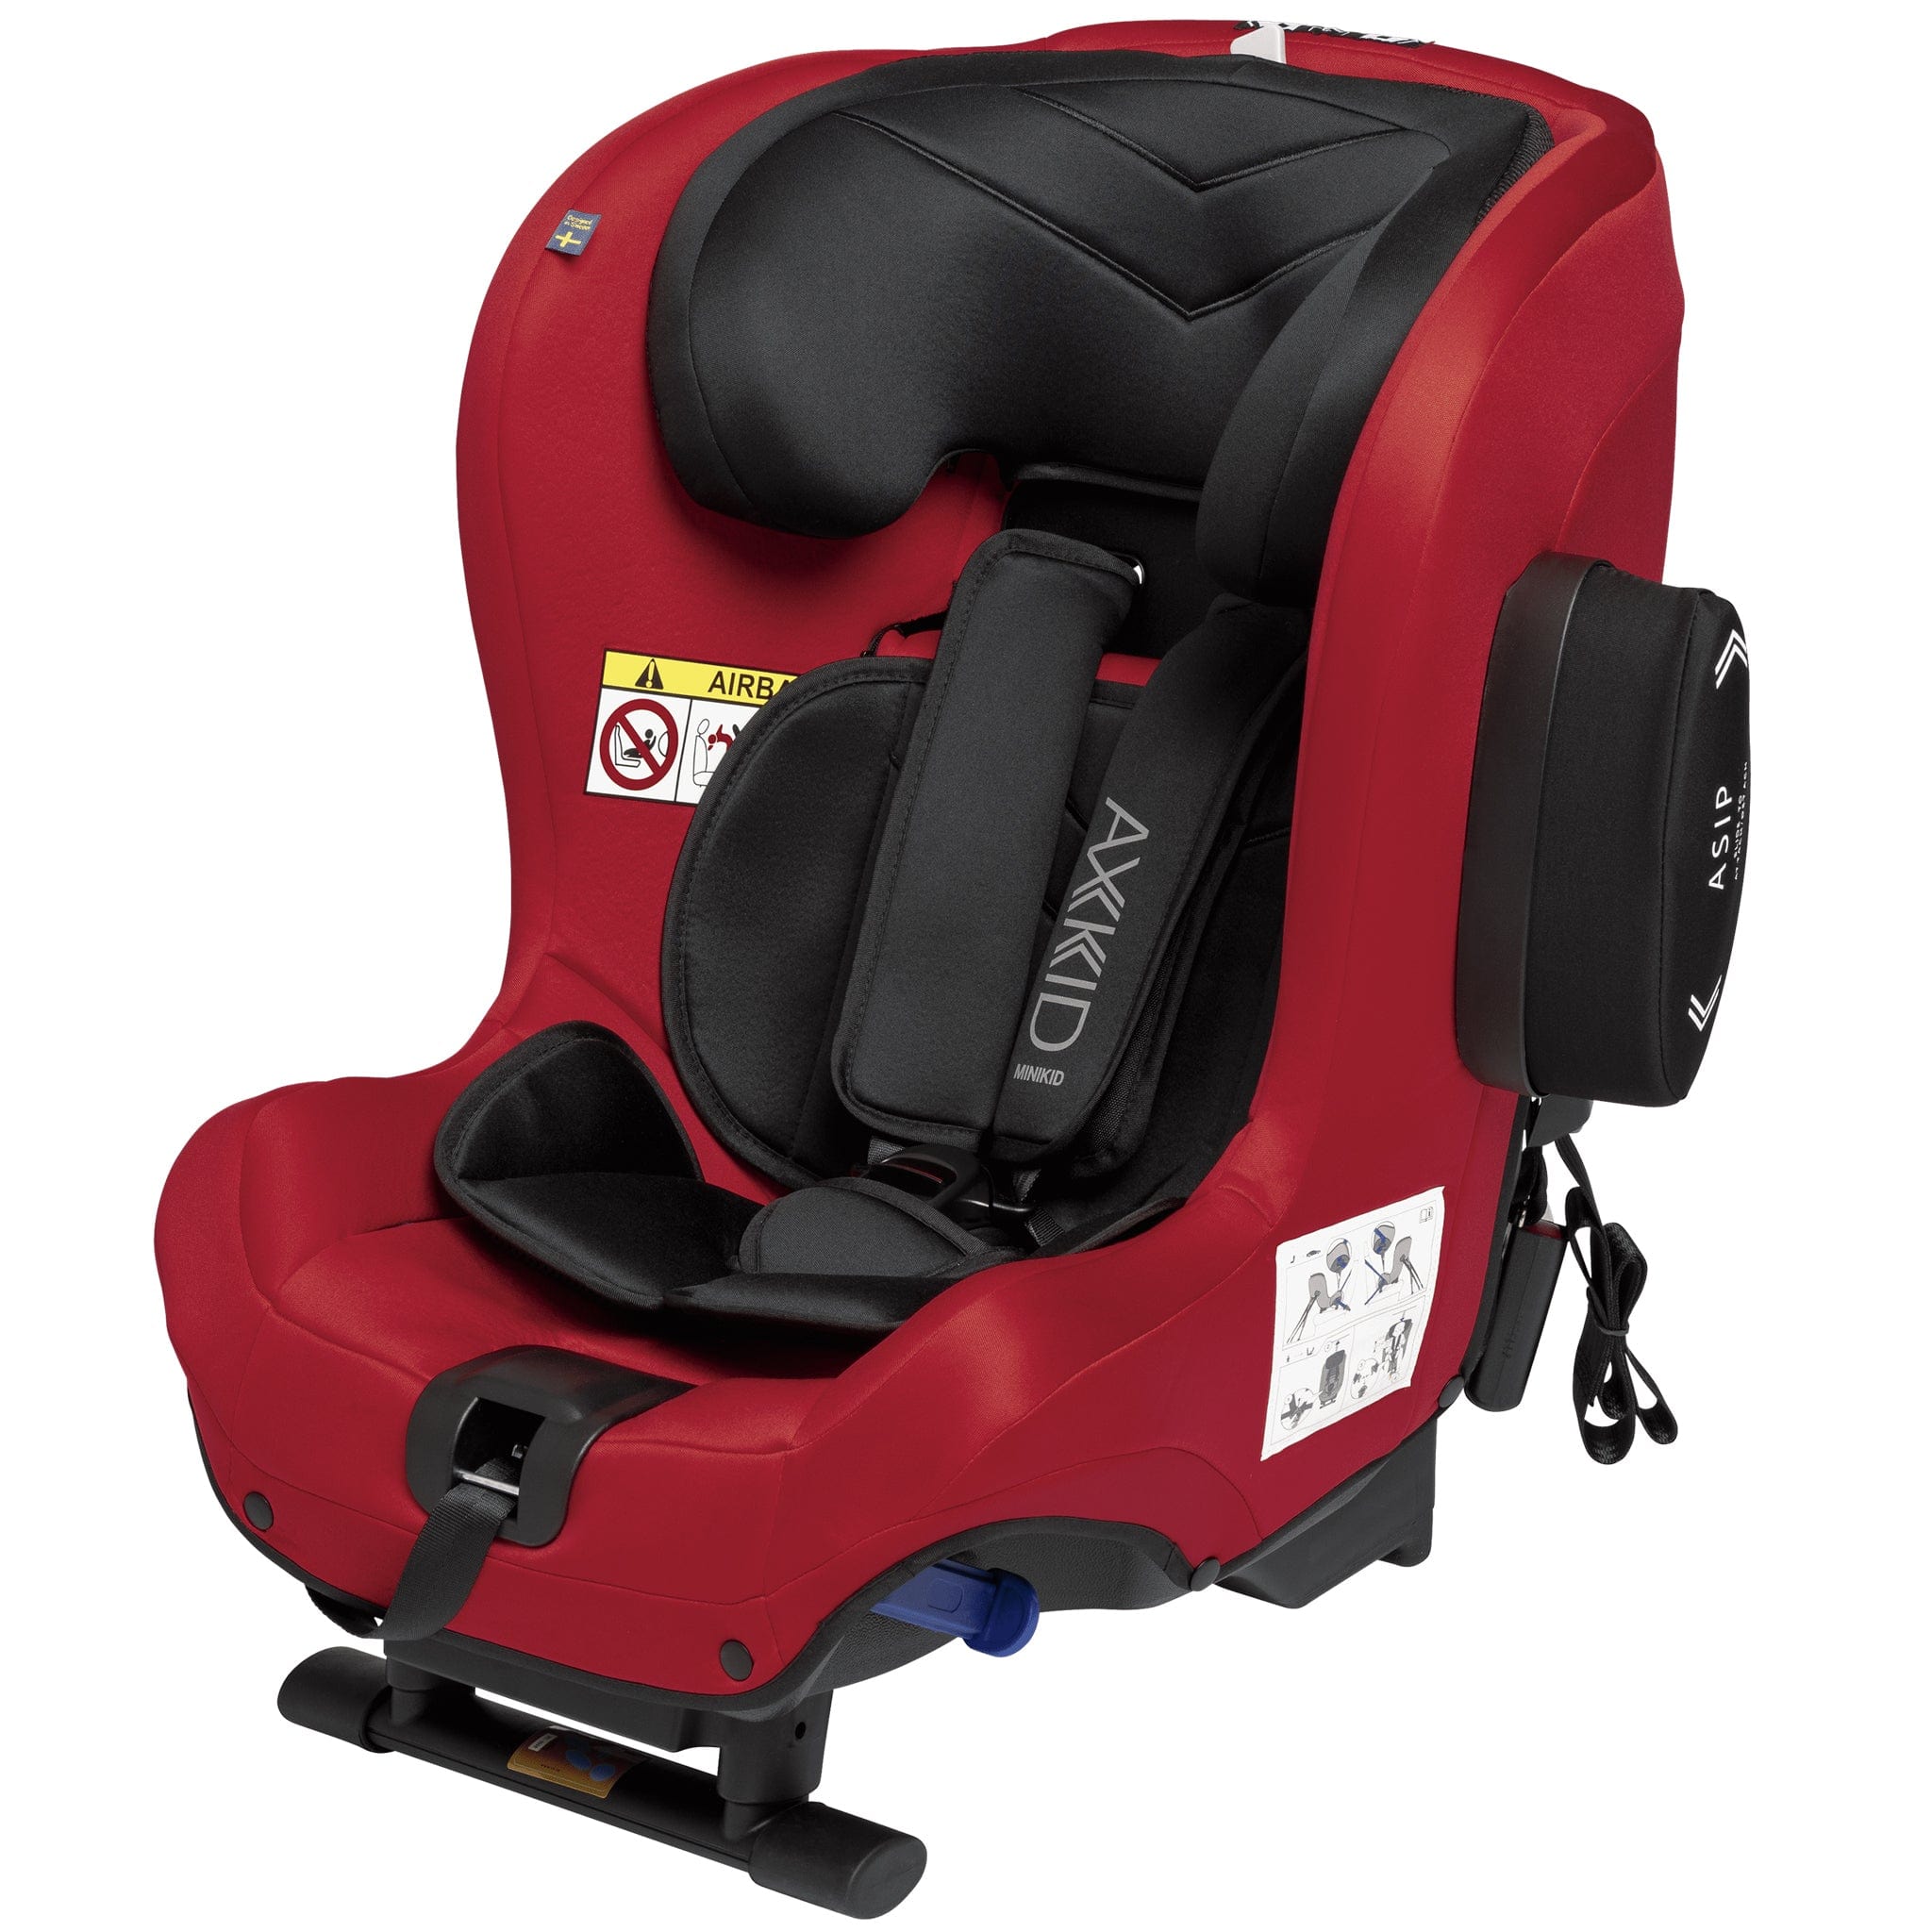 Axkid Minikid 2 - Shellfish With Free Seat Protector Extended Rear Facing Car Seats 10536-SHE 7350057585894